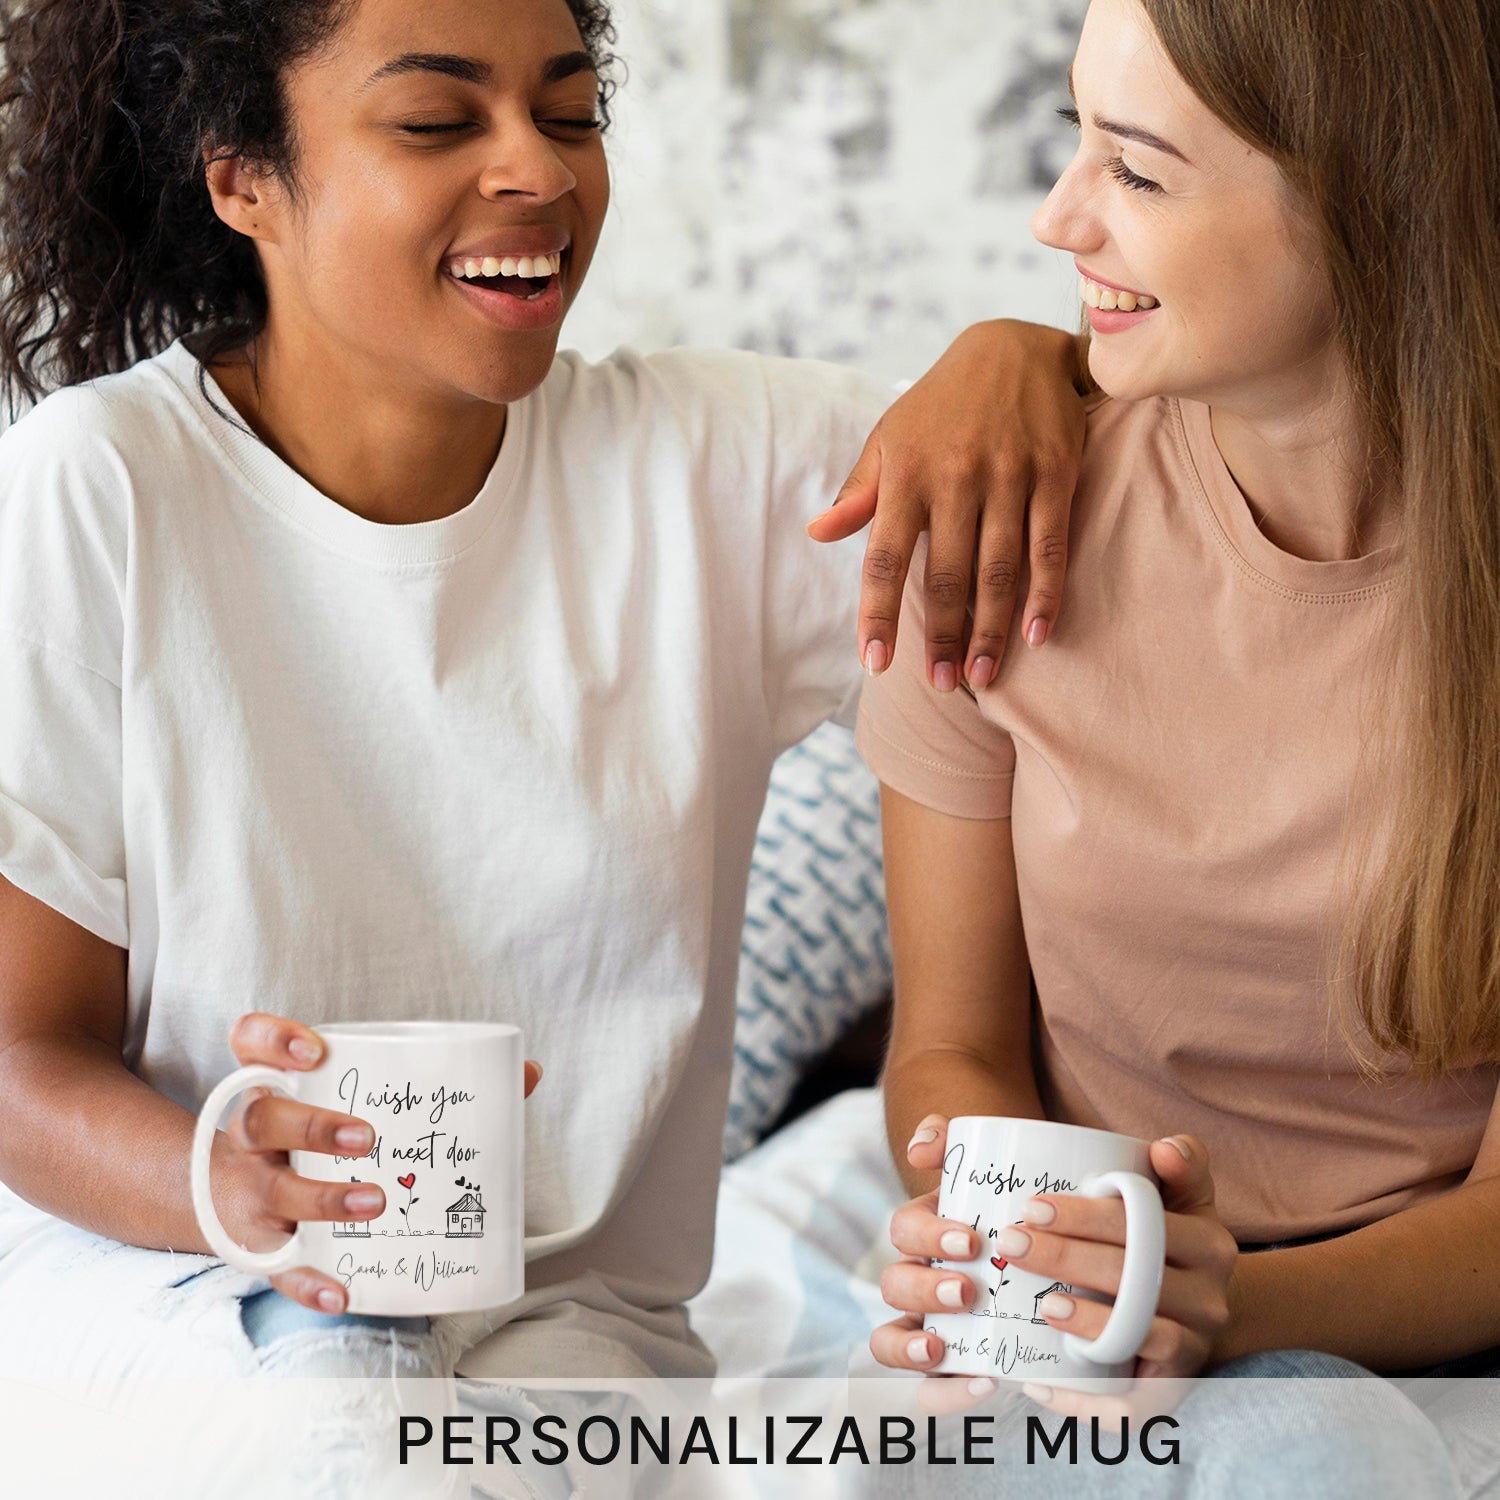 I Wish You Lived Next Door - Personalized Anniversary, Valentine's Day gift for Long Distance Couple - Custom Mug - MyMindfulGifts